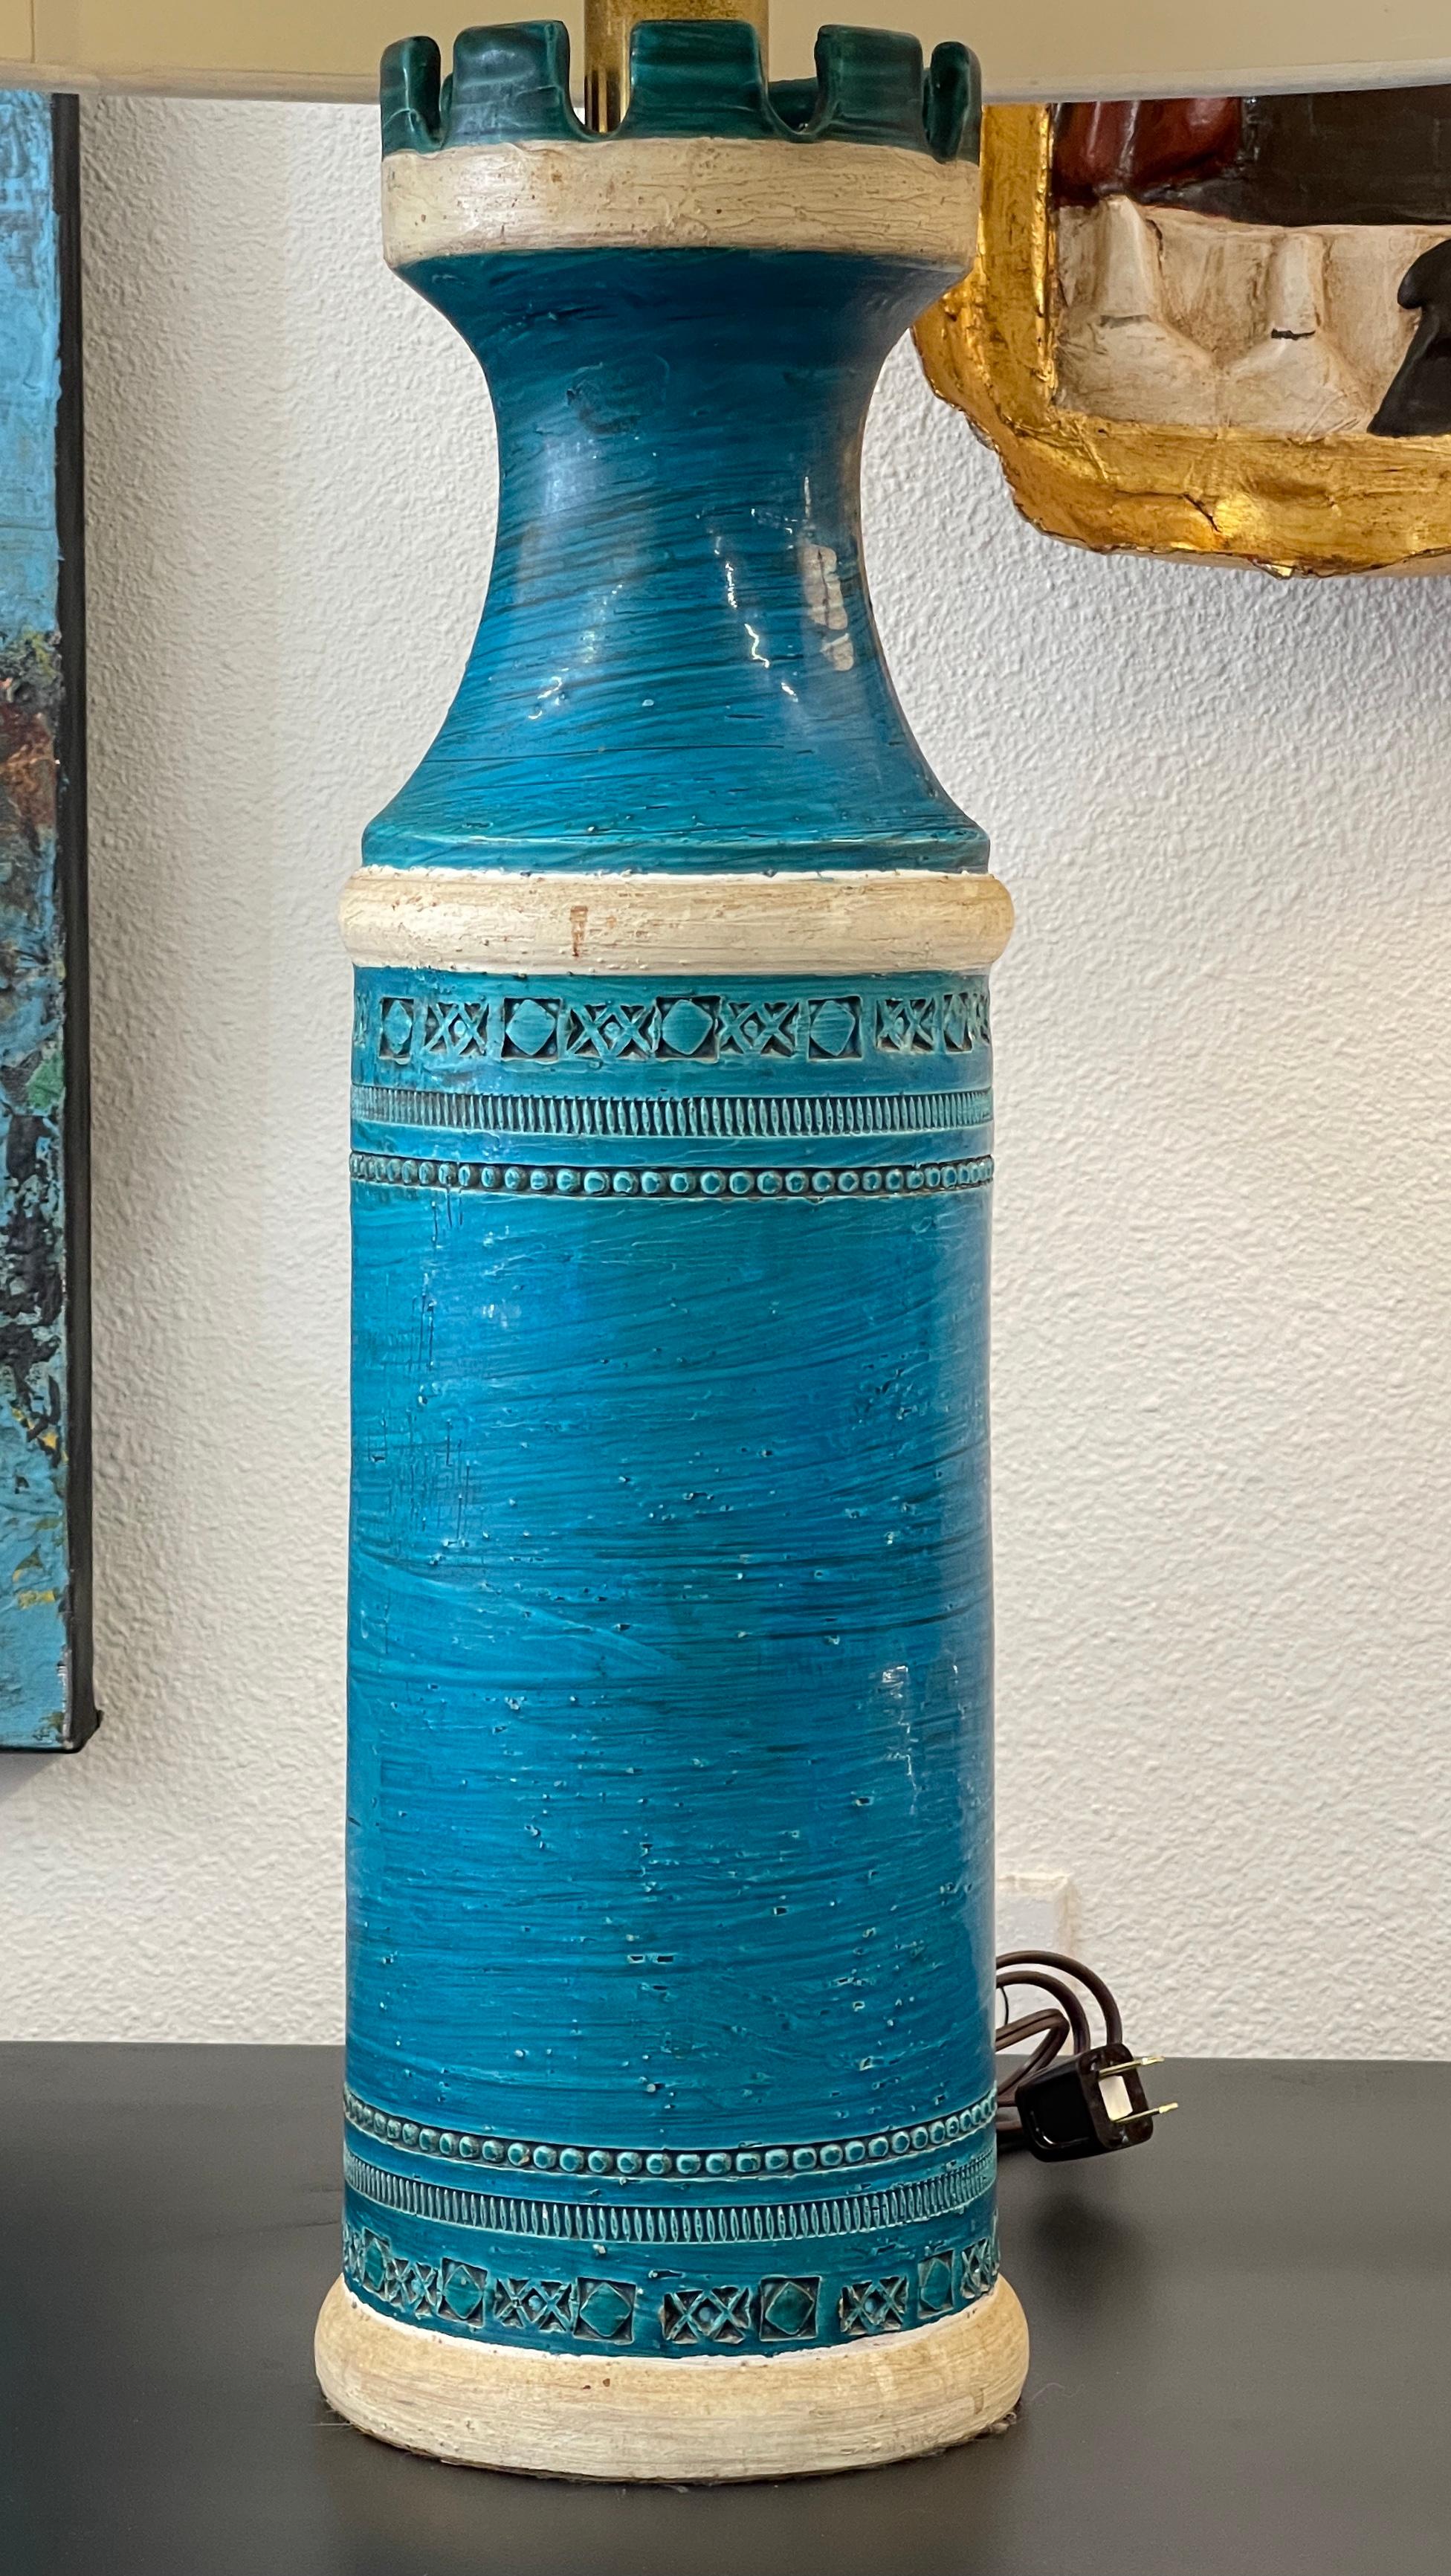 Lovely large Bitossi Ceramic lamp designed by Aldo Londi in Rimini Blue. Unusual castle trellis top. The lamp has been rewired and functions well. The shade can be included but has some wear and marks to it. The ceramic piece is in good condition